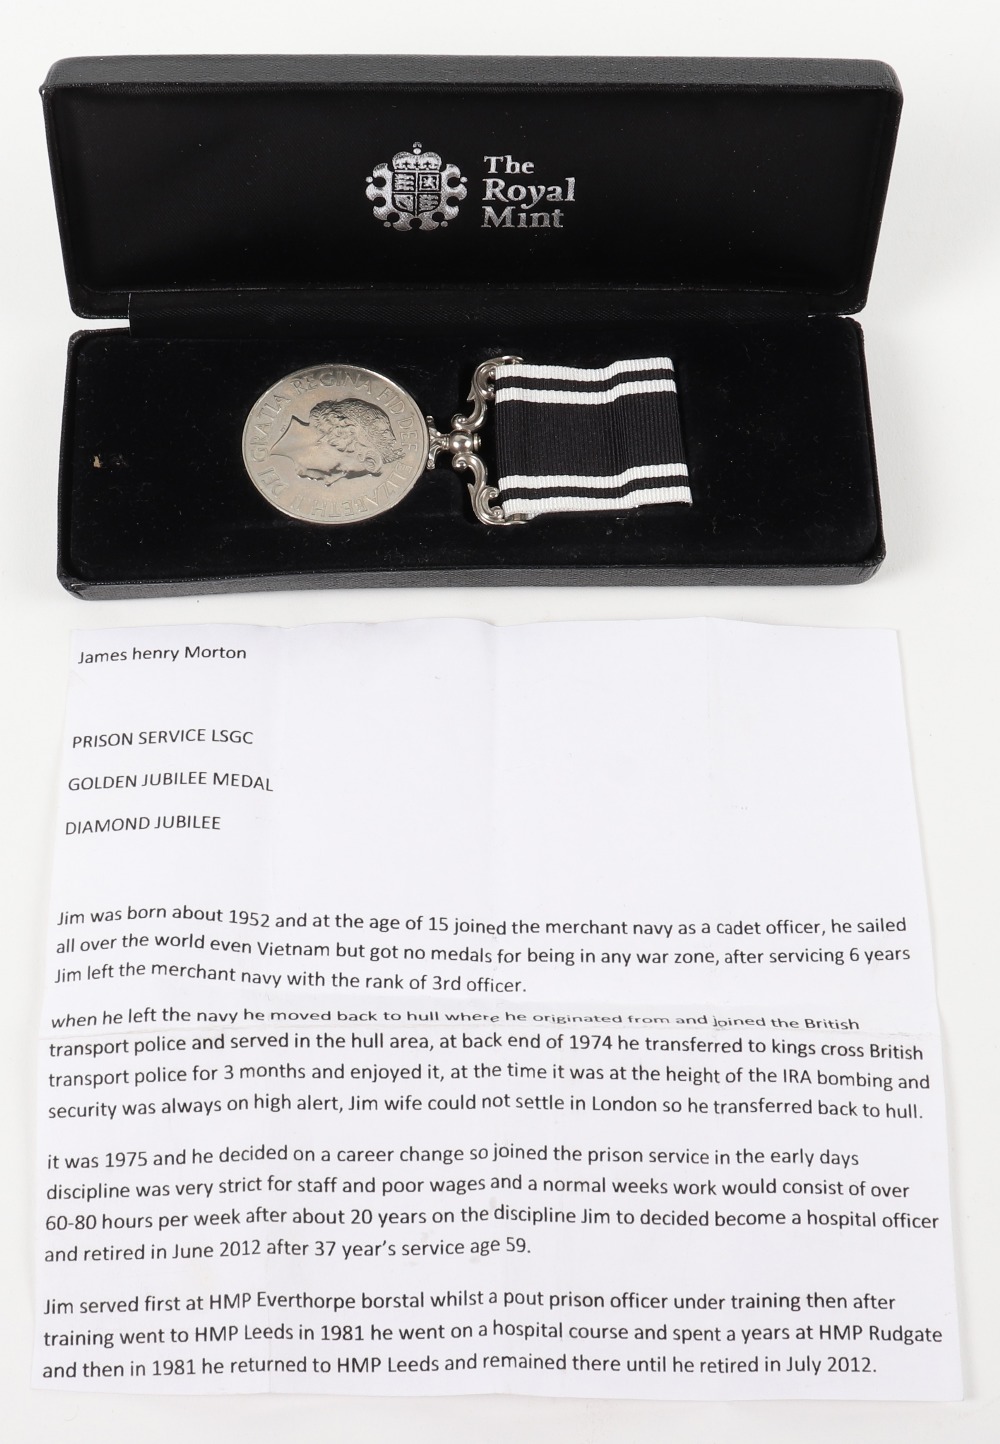 EIIR Prison Service Long Service and Good Conduct Medal - Image 3 of 4